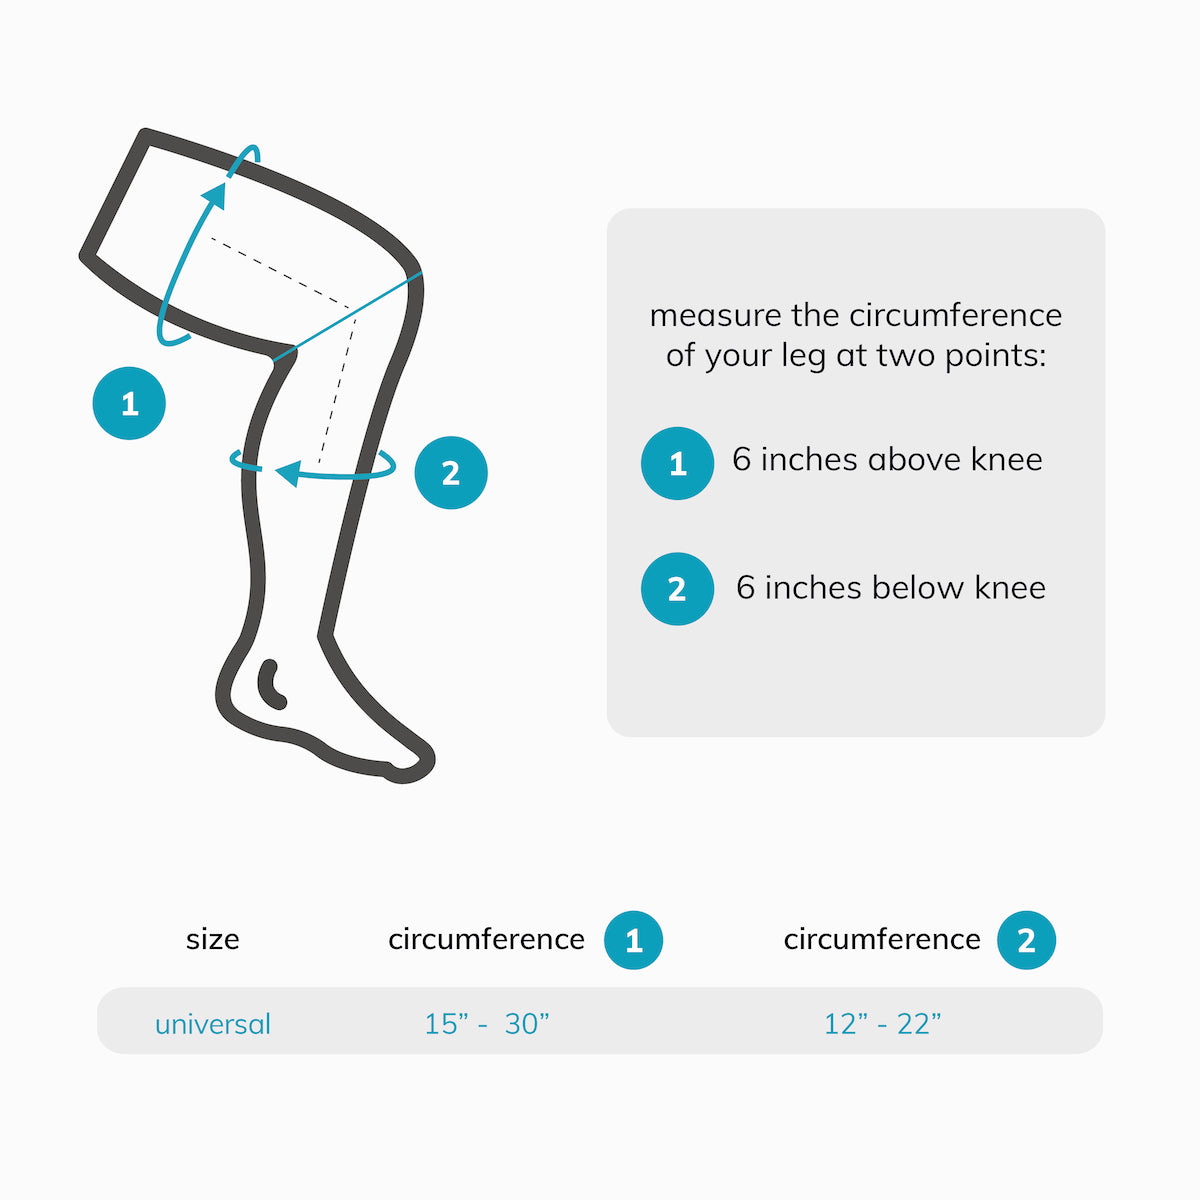 the sizing chart for the arthritic knee brace is universal fitting up to a 30 inch thigh circumference